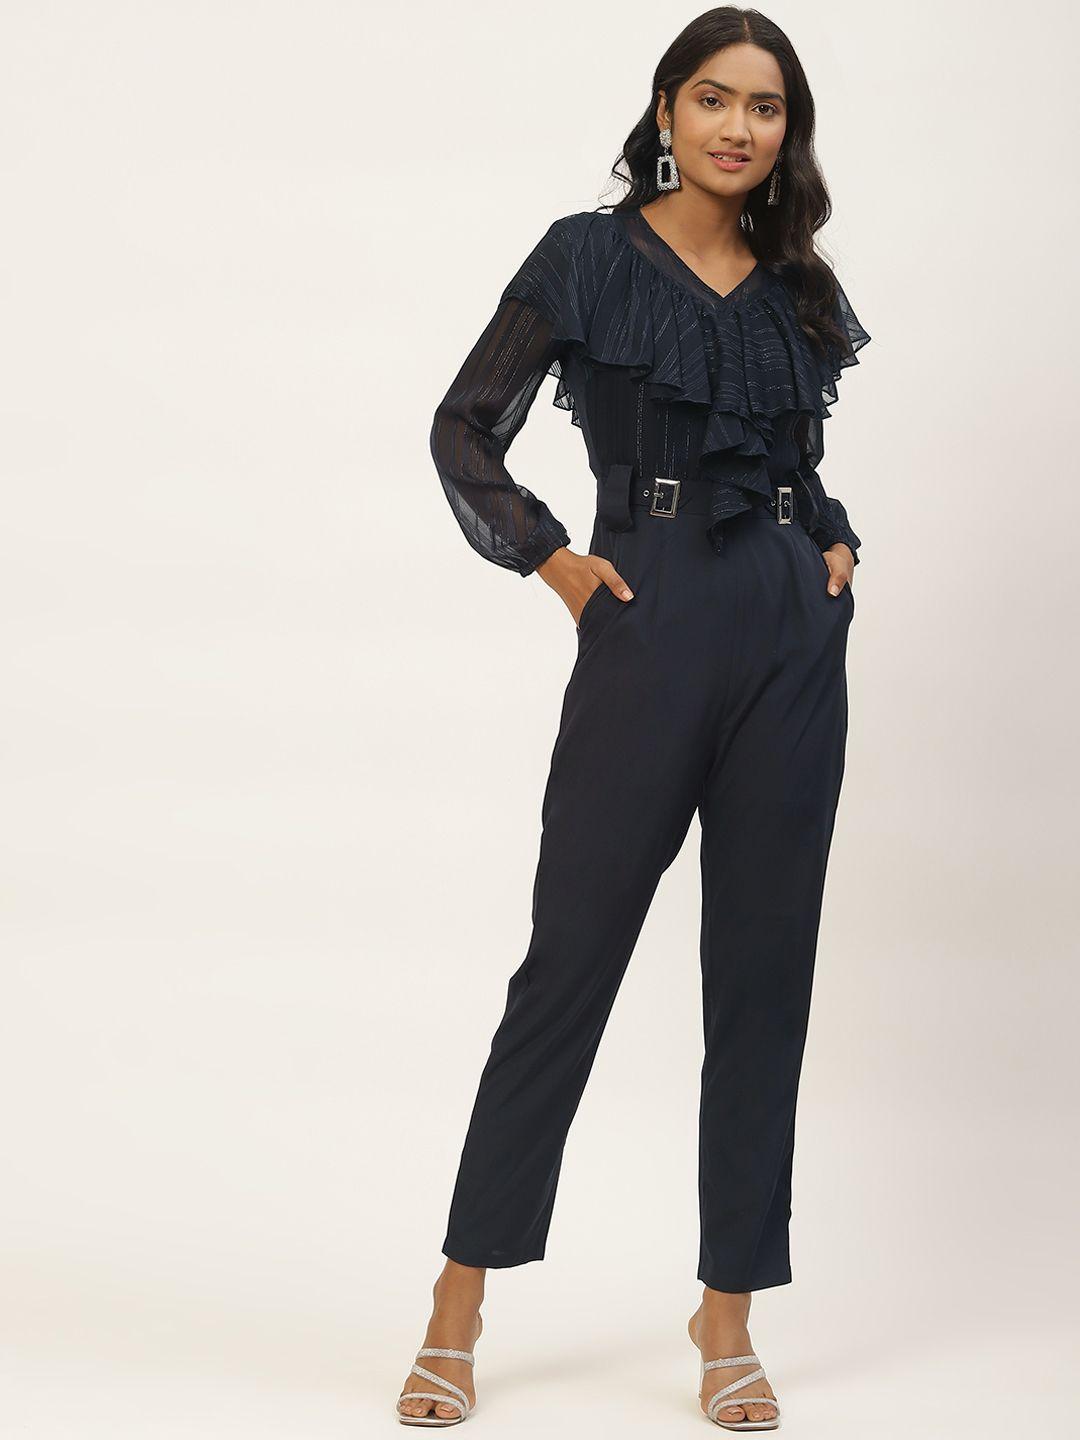 magnetic designs navy blue self strip basic jumpsuit with ruffles detail